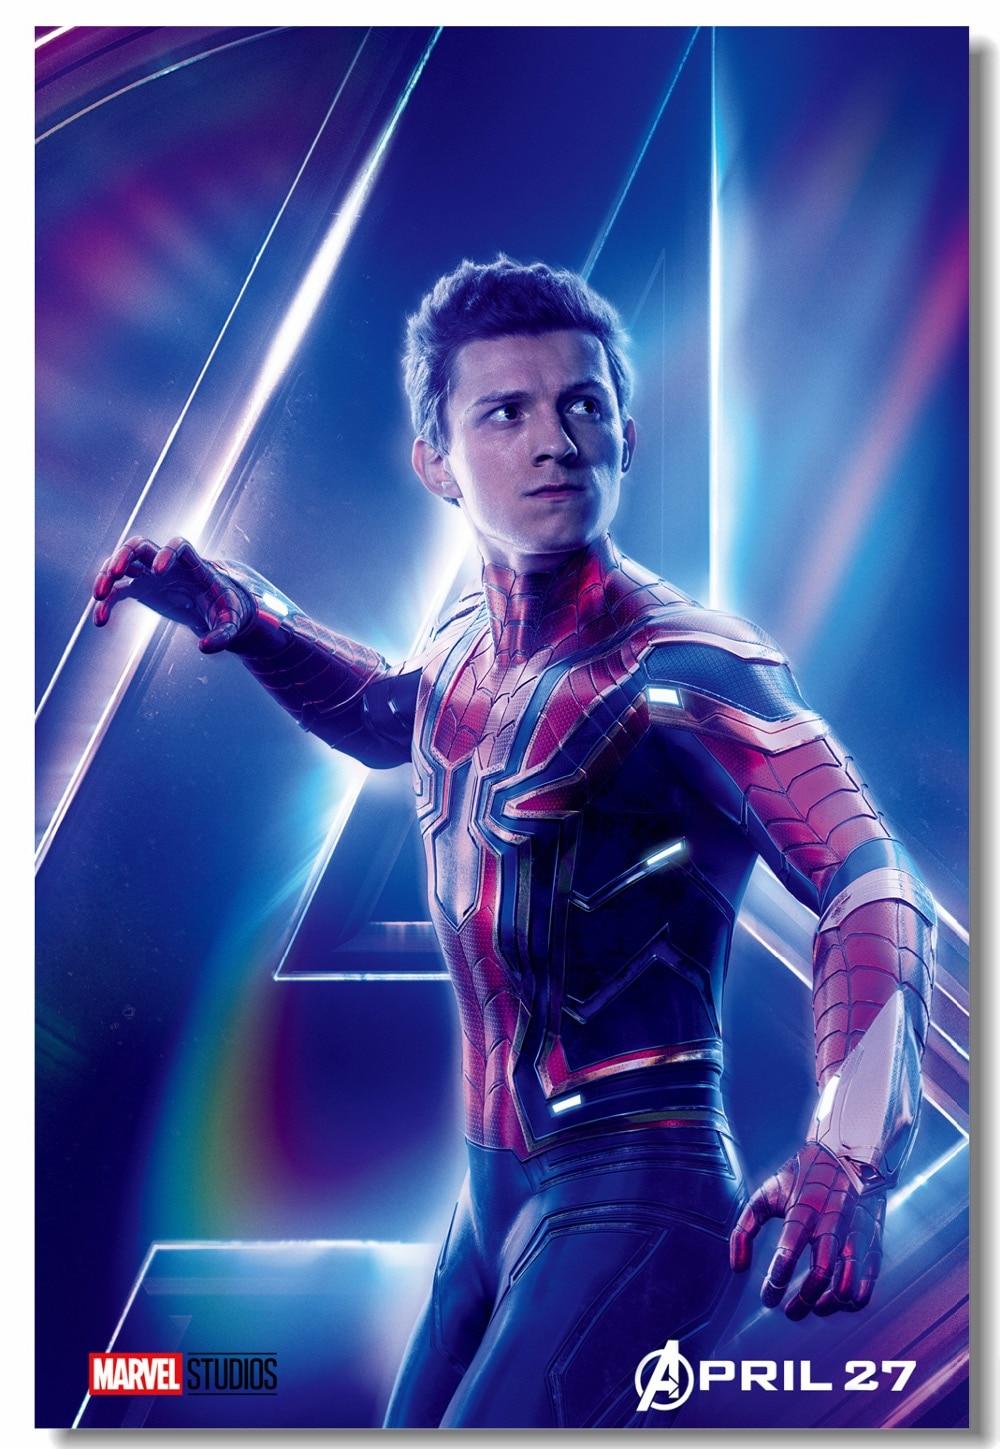 US $5.99 25% OFF. Custom Canvas Wall Painting Tom Holland Poster Iron Spider Man Stickers Avengers Infinity War Wallpaper Living Room Mural #-in